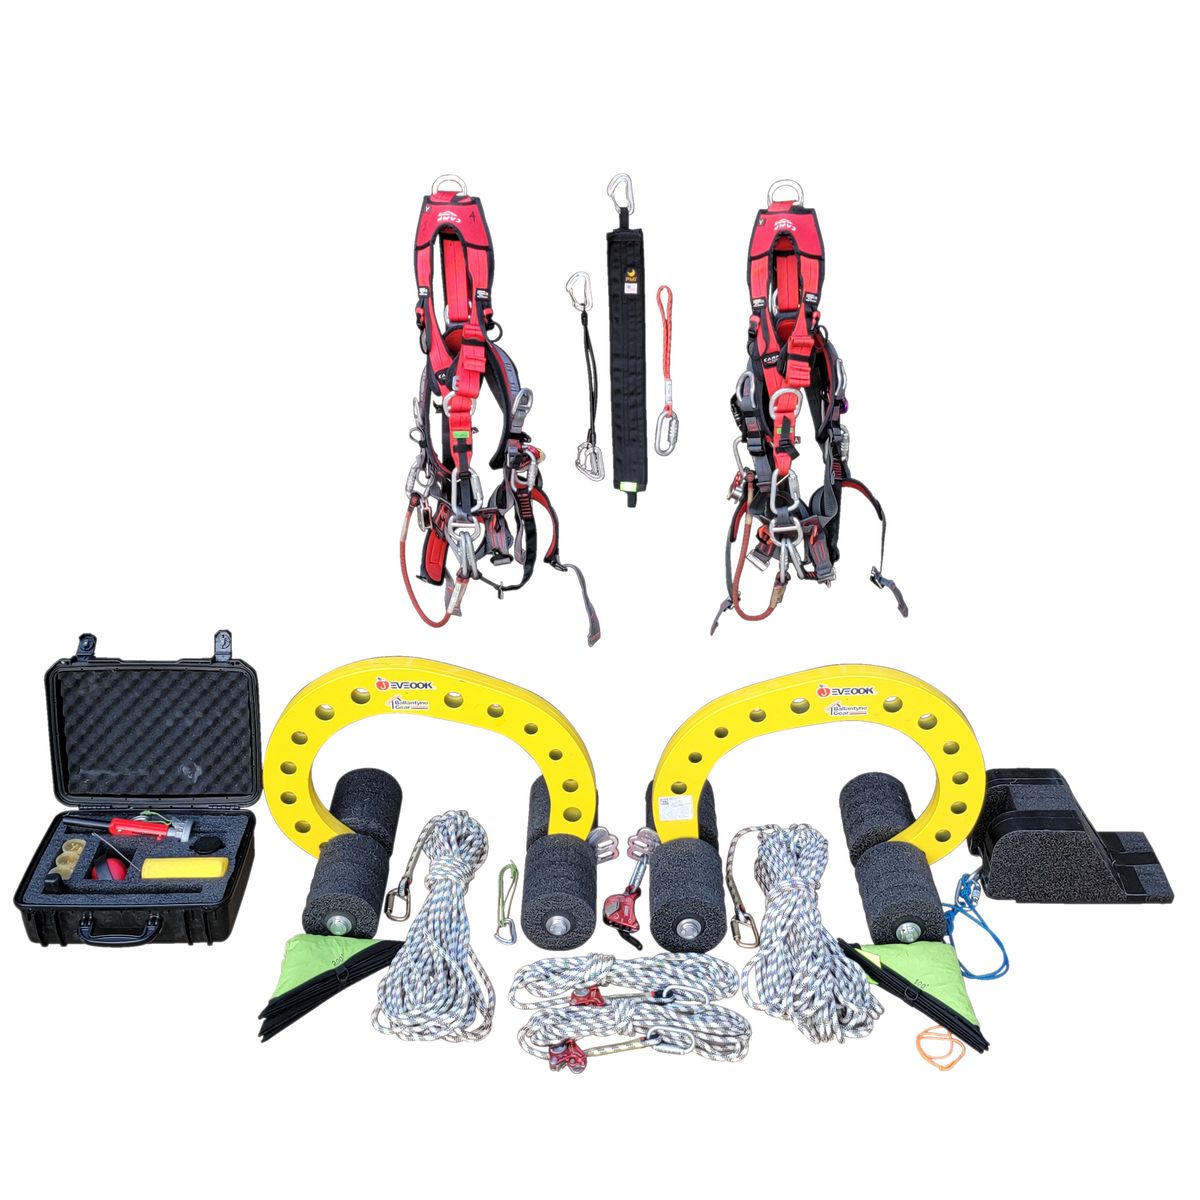 Eveook Non-Penetrating Anchor Line Fall Protection System - For up to 8 users - Includes harnesses and gear for 2 users and protection for installer